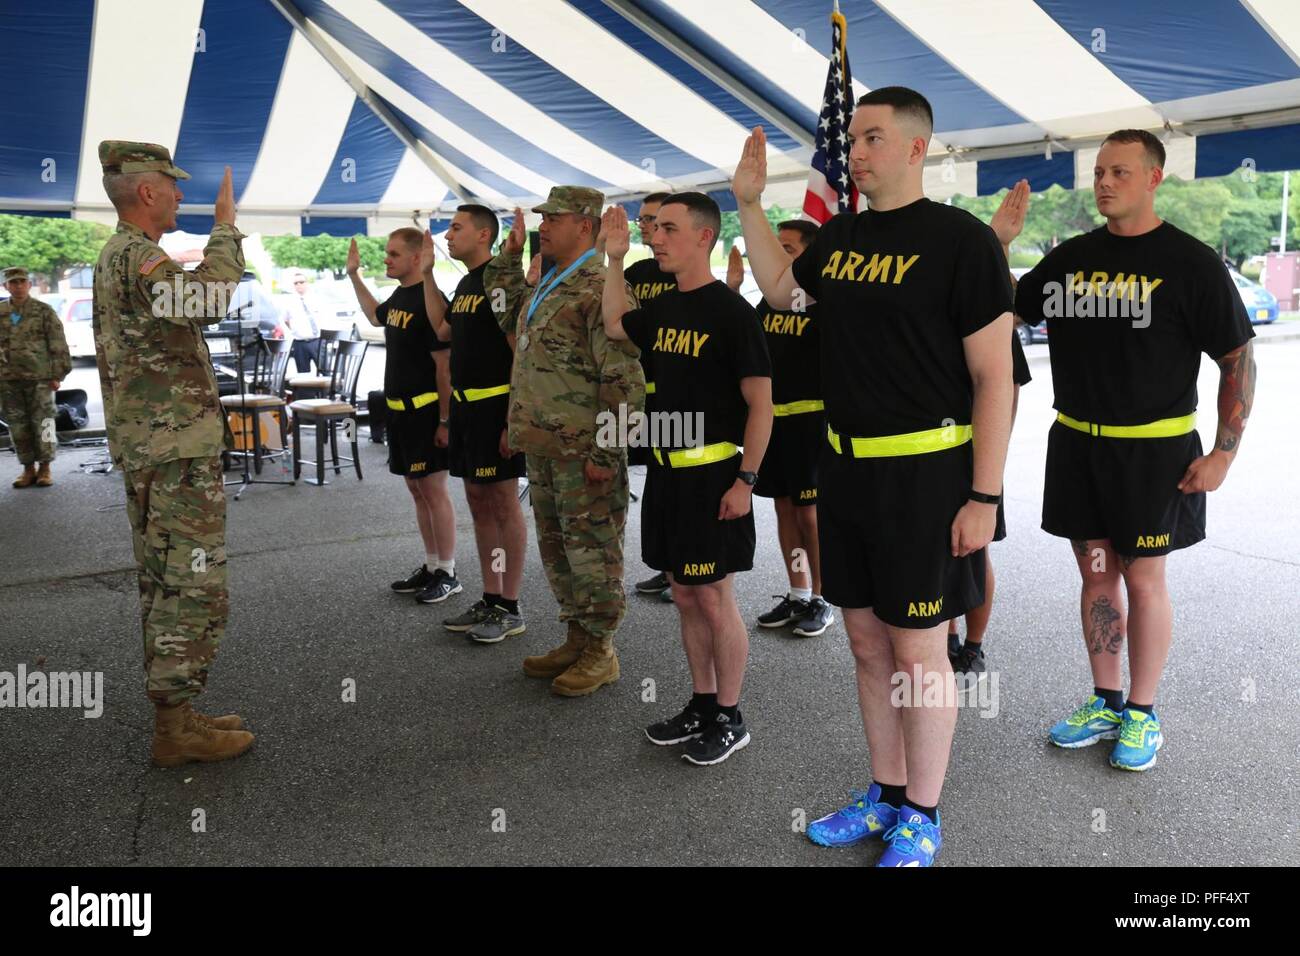 Ten Soldiers take the Army's oath of enlistment with Maj. Gen. James F. Pasquarette, commanding general of USARJ, during a mass reenlistment ceremony held June 13, 2018 outside CZCC for the Army Birthday Week celebration. Stock Photo